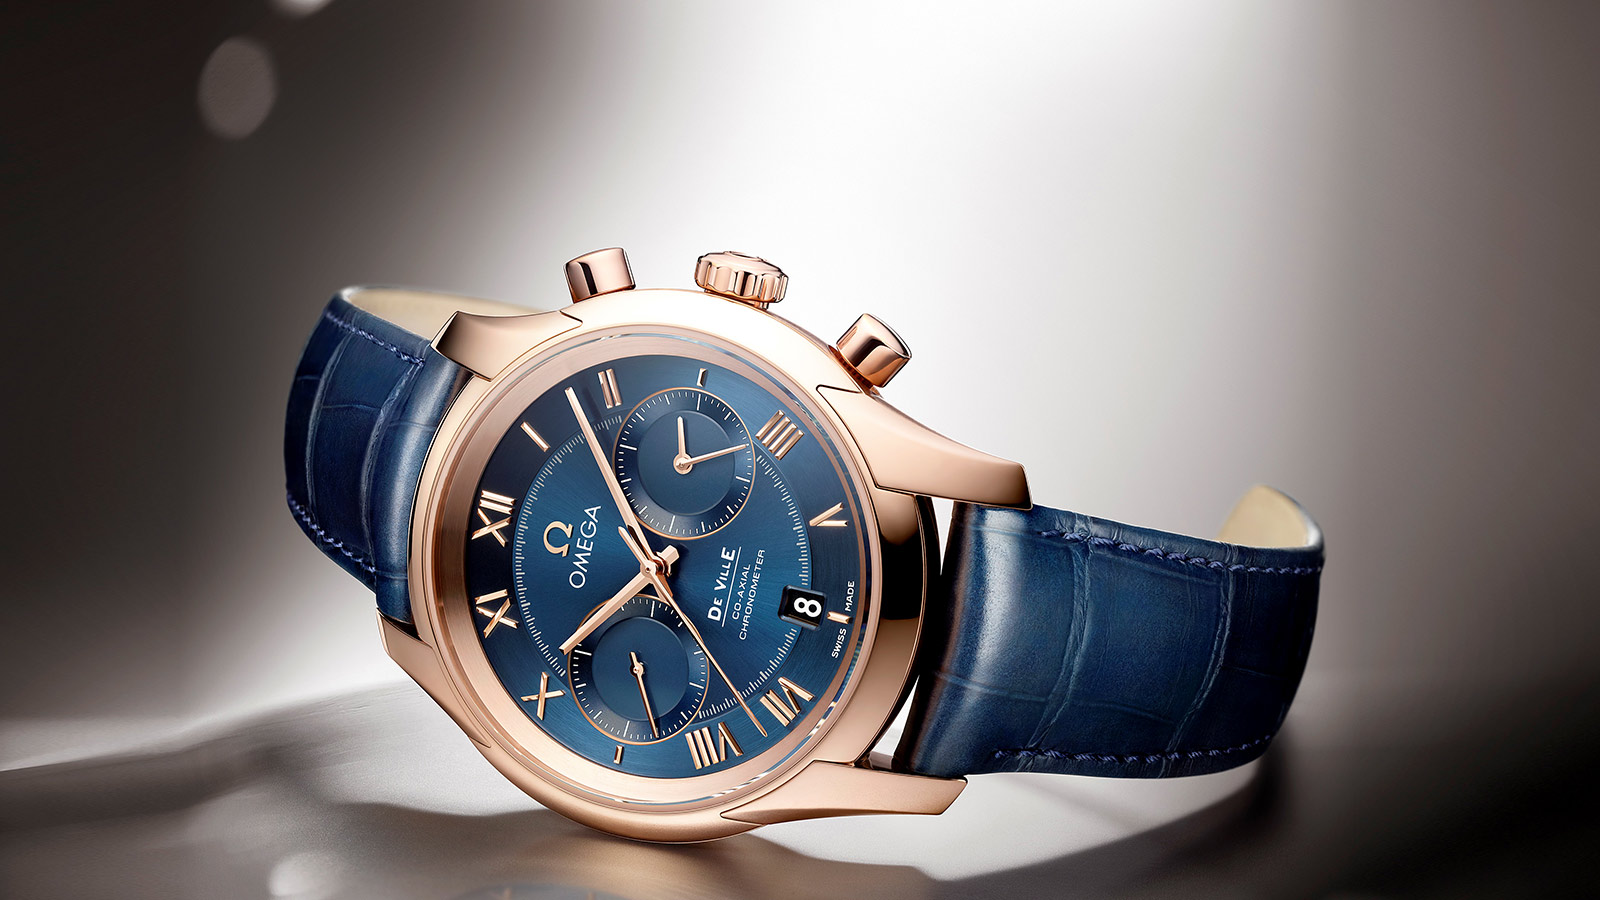 OMEGA Announces New 5-Year International Warranty on All Watches